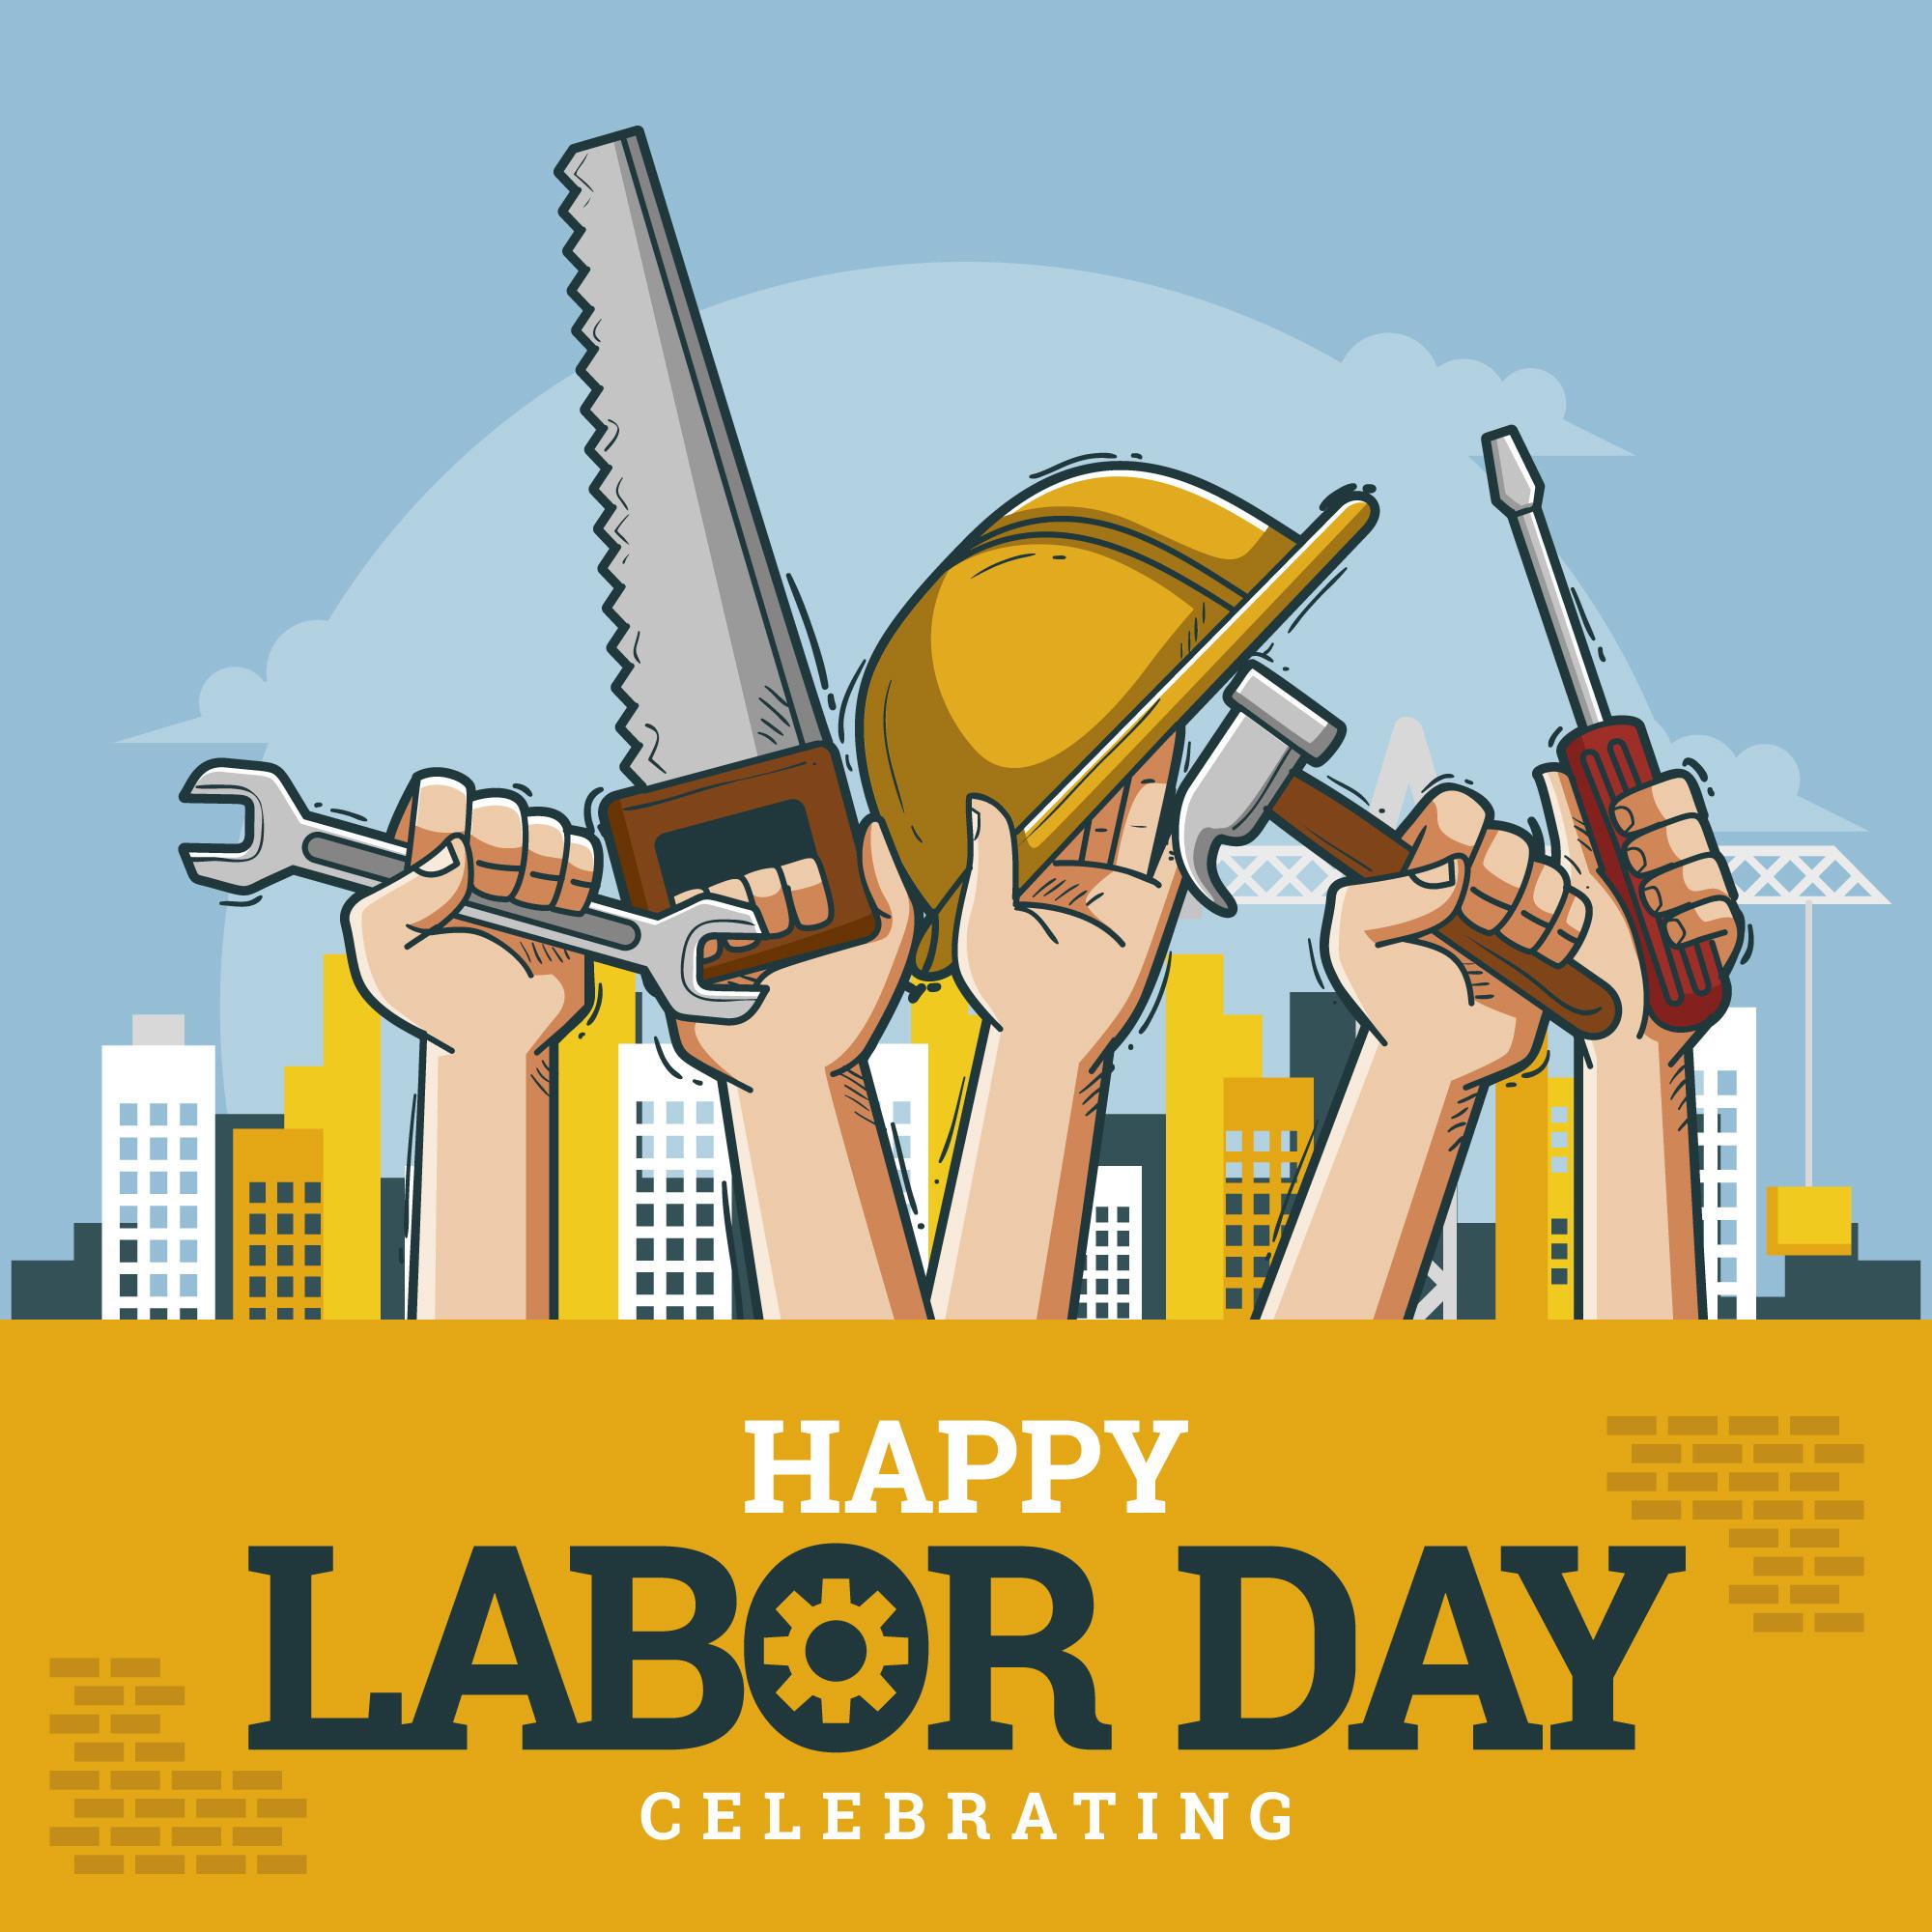 Celebrating Labor Day - A Tribute to Hard Work and Dedication